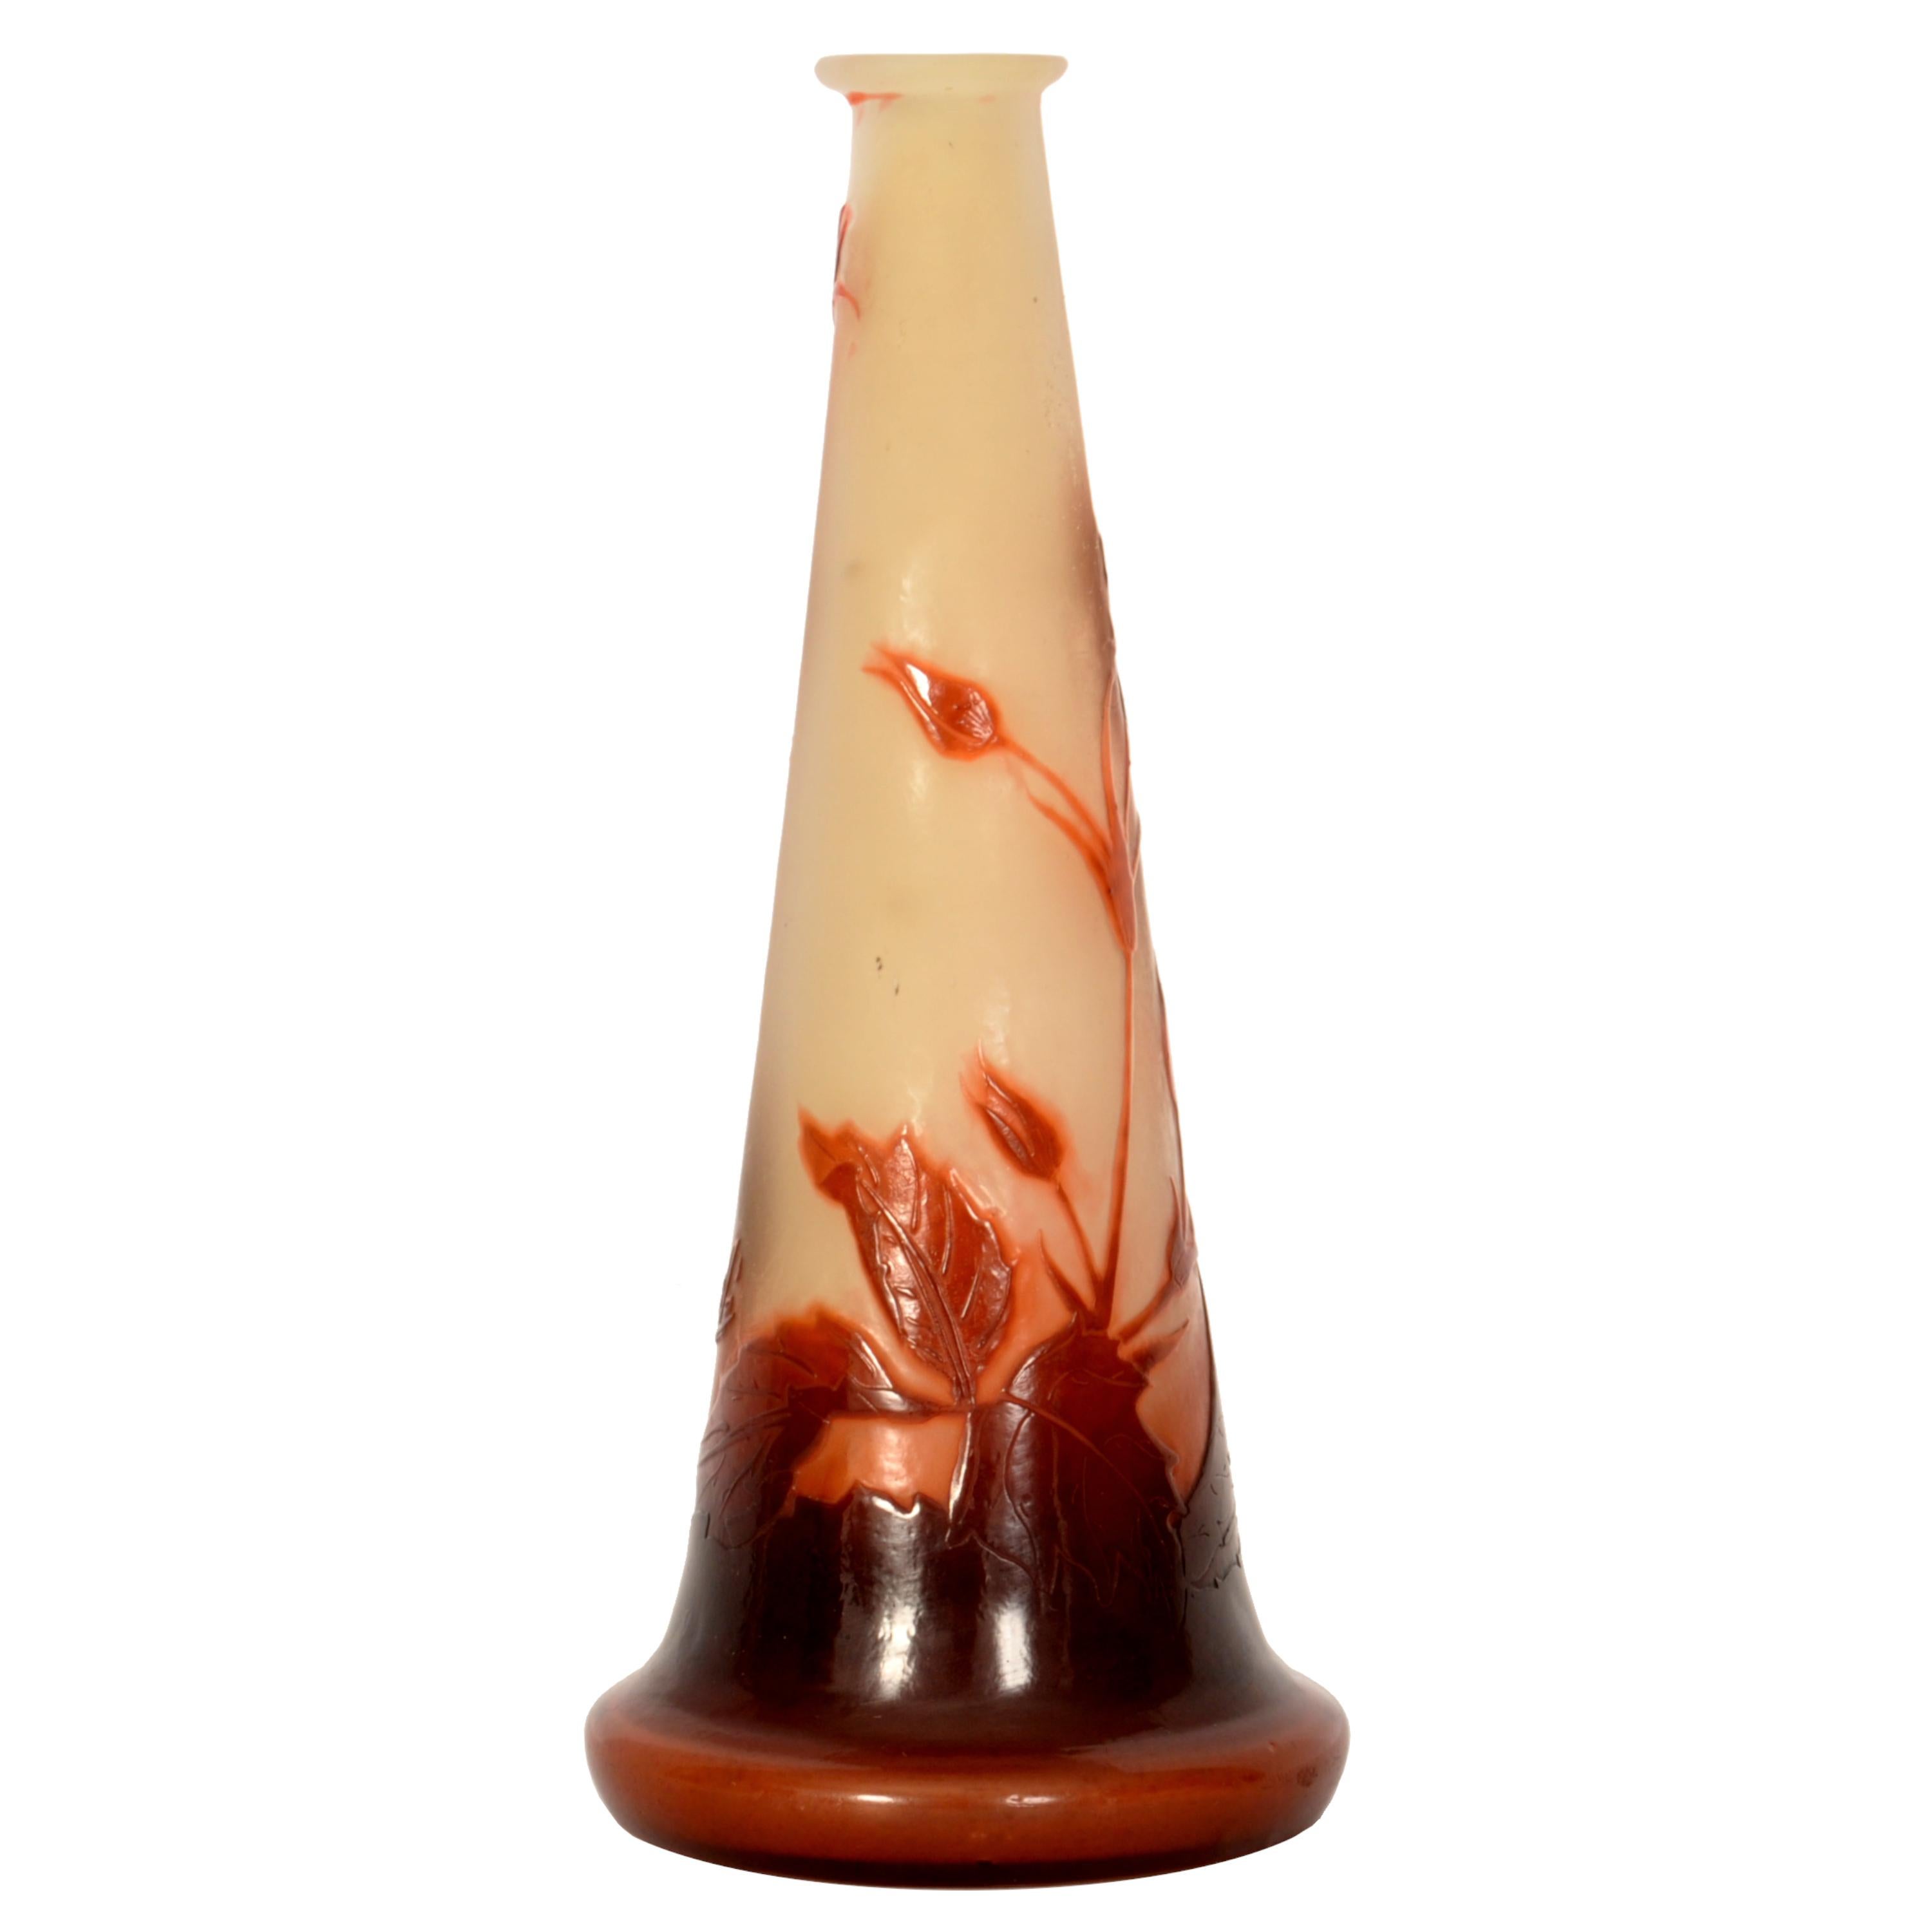 Early 20th Century Antique French Art Nouveau Fire Polished Cameo Glass Emile Gallé Stem Vase, 1900 For Sale